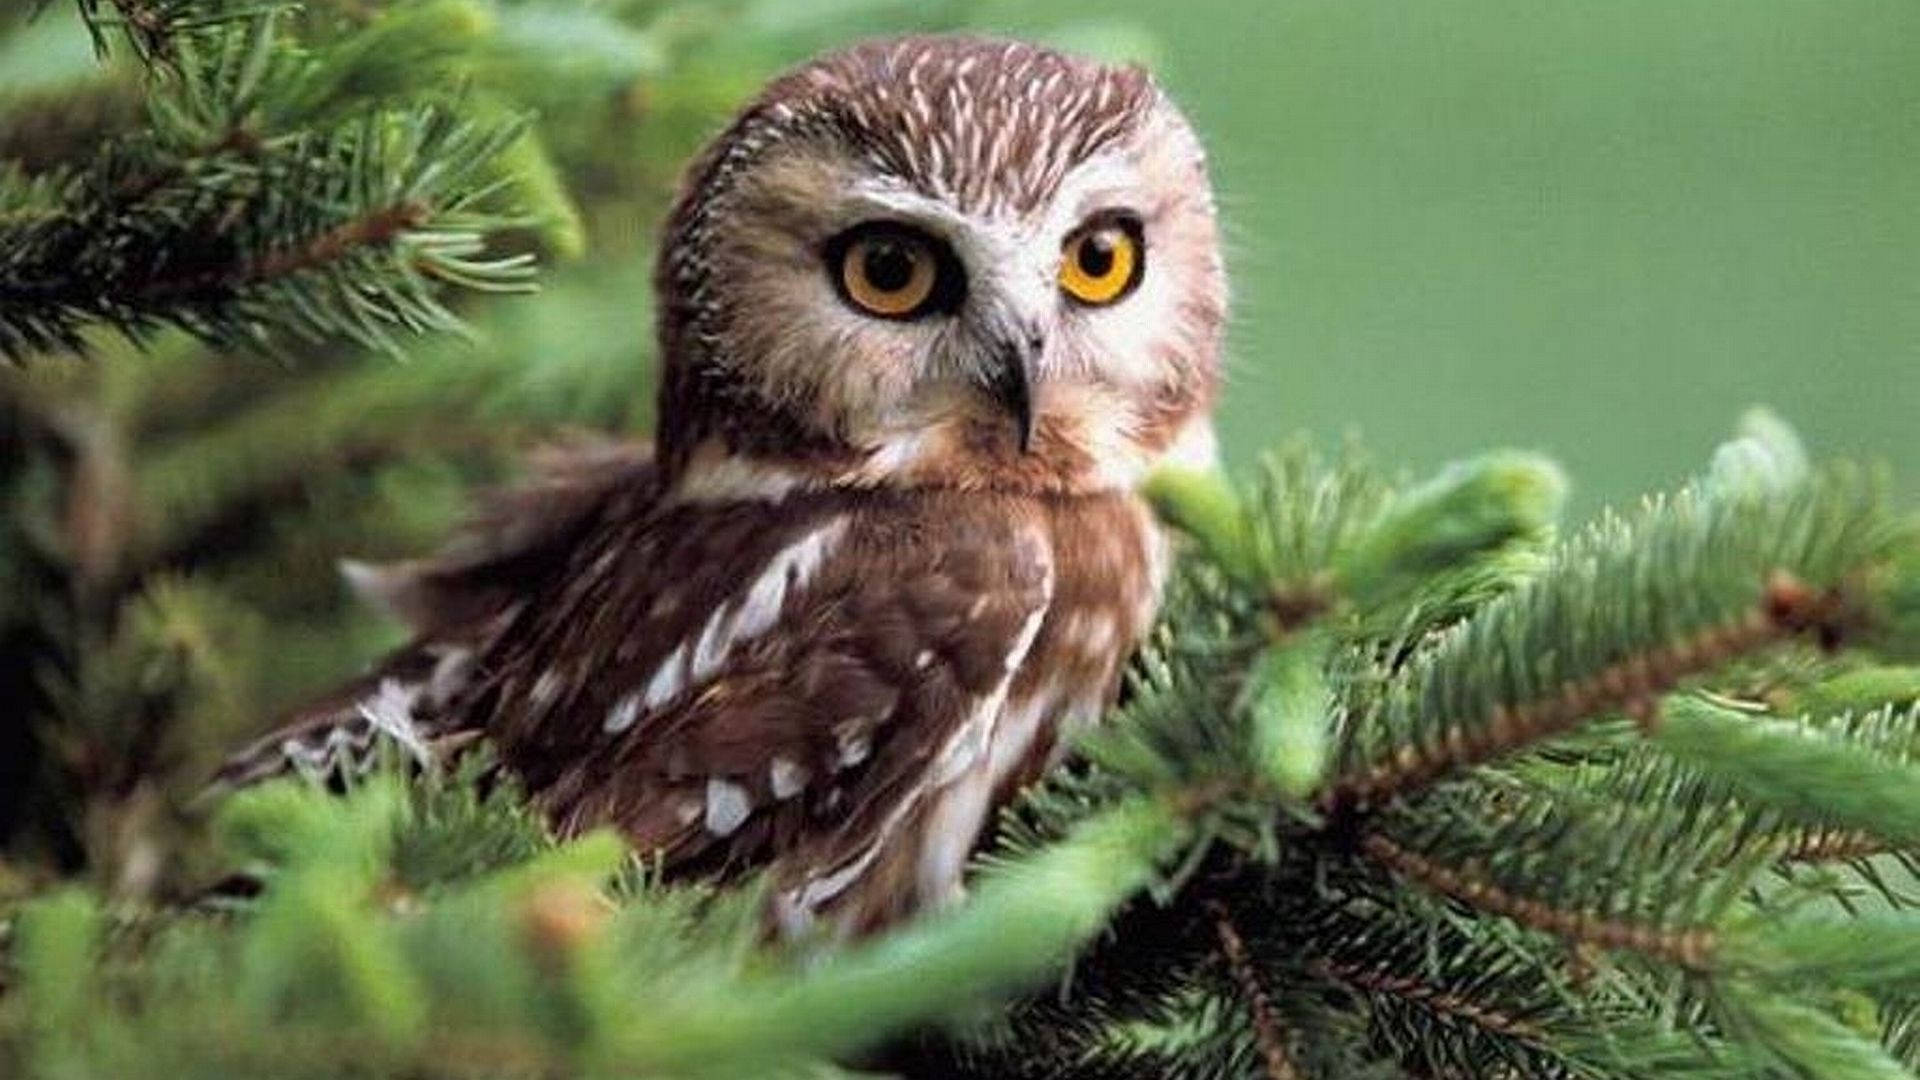 A Cute Baby Owl Posing in a Grove of Pines Wallpaper